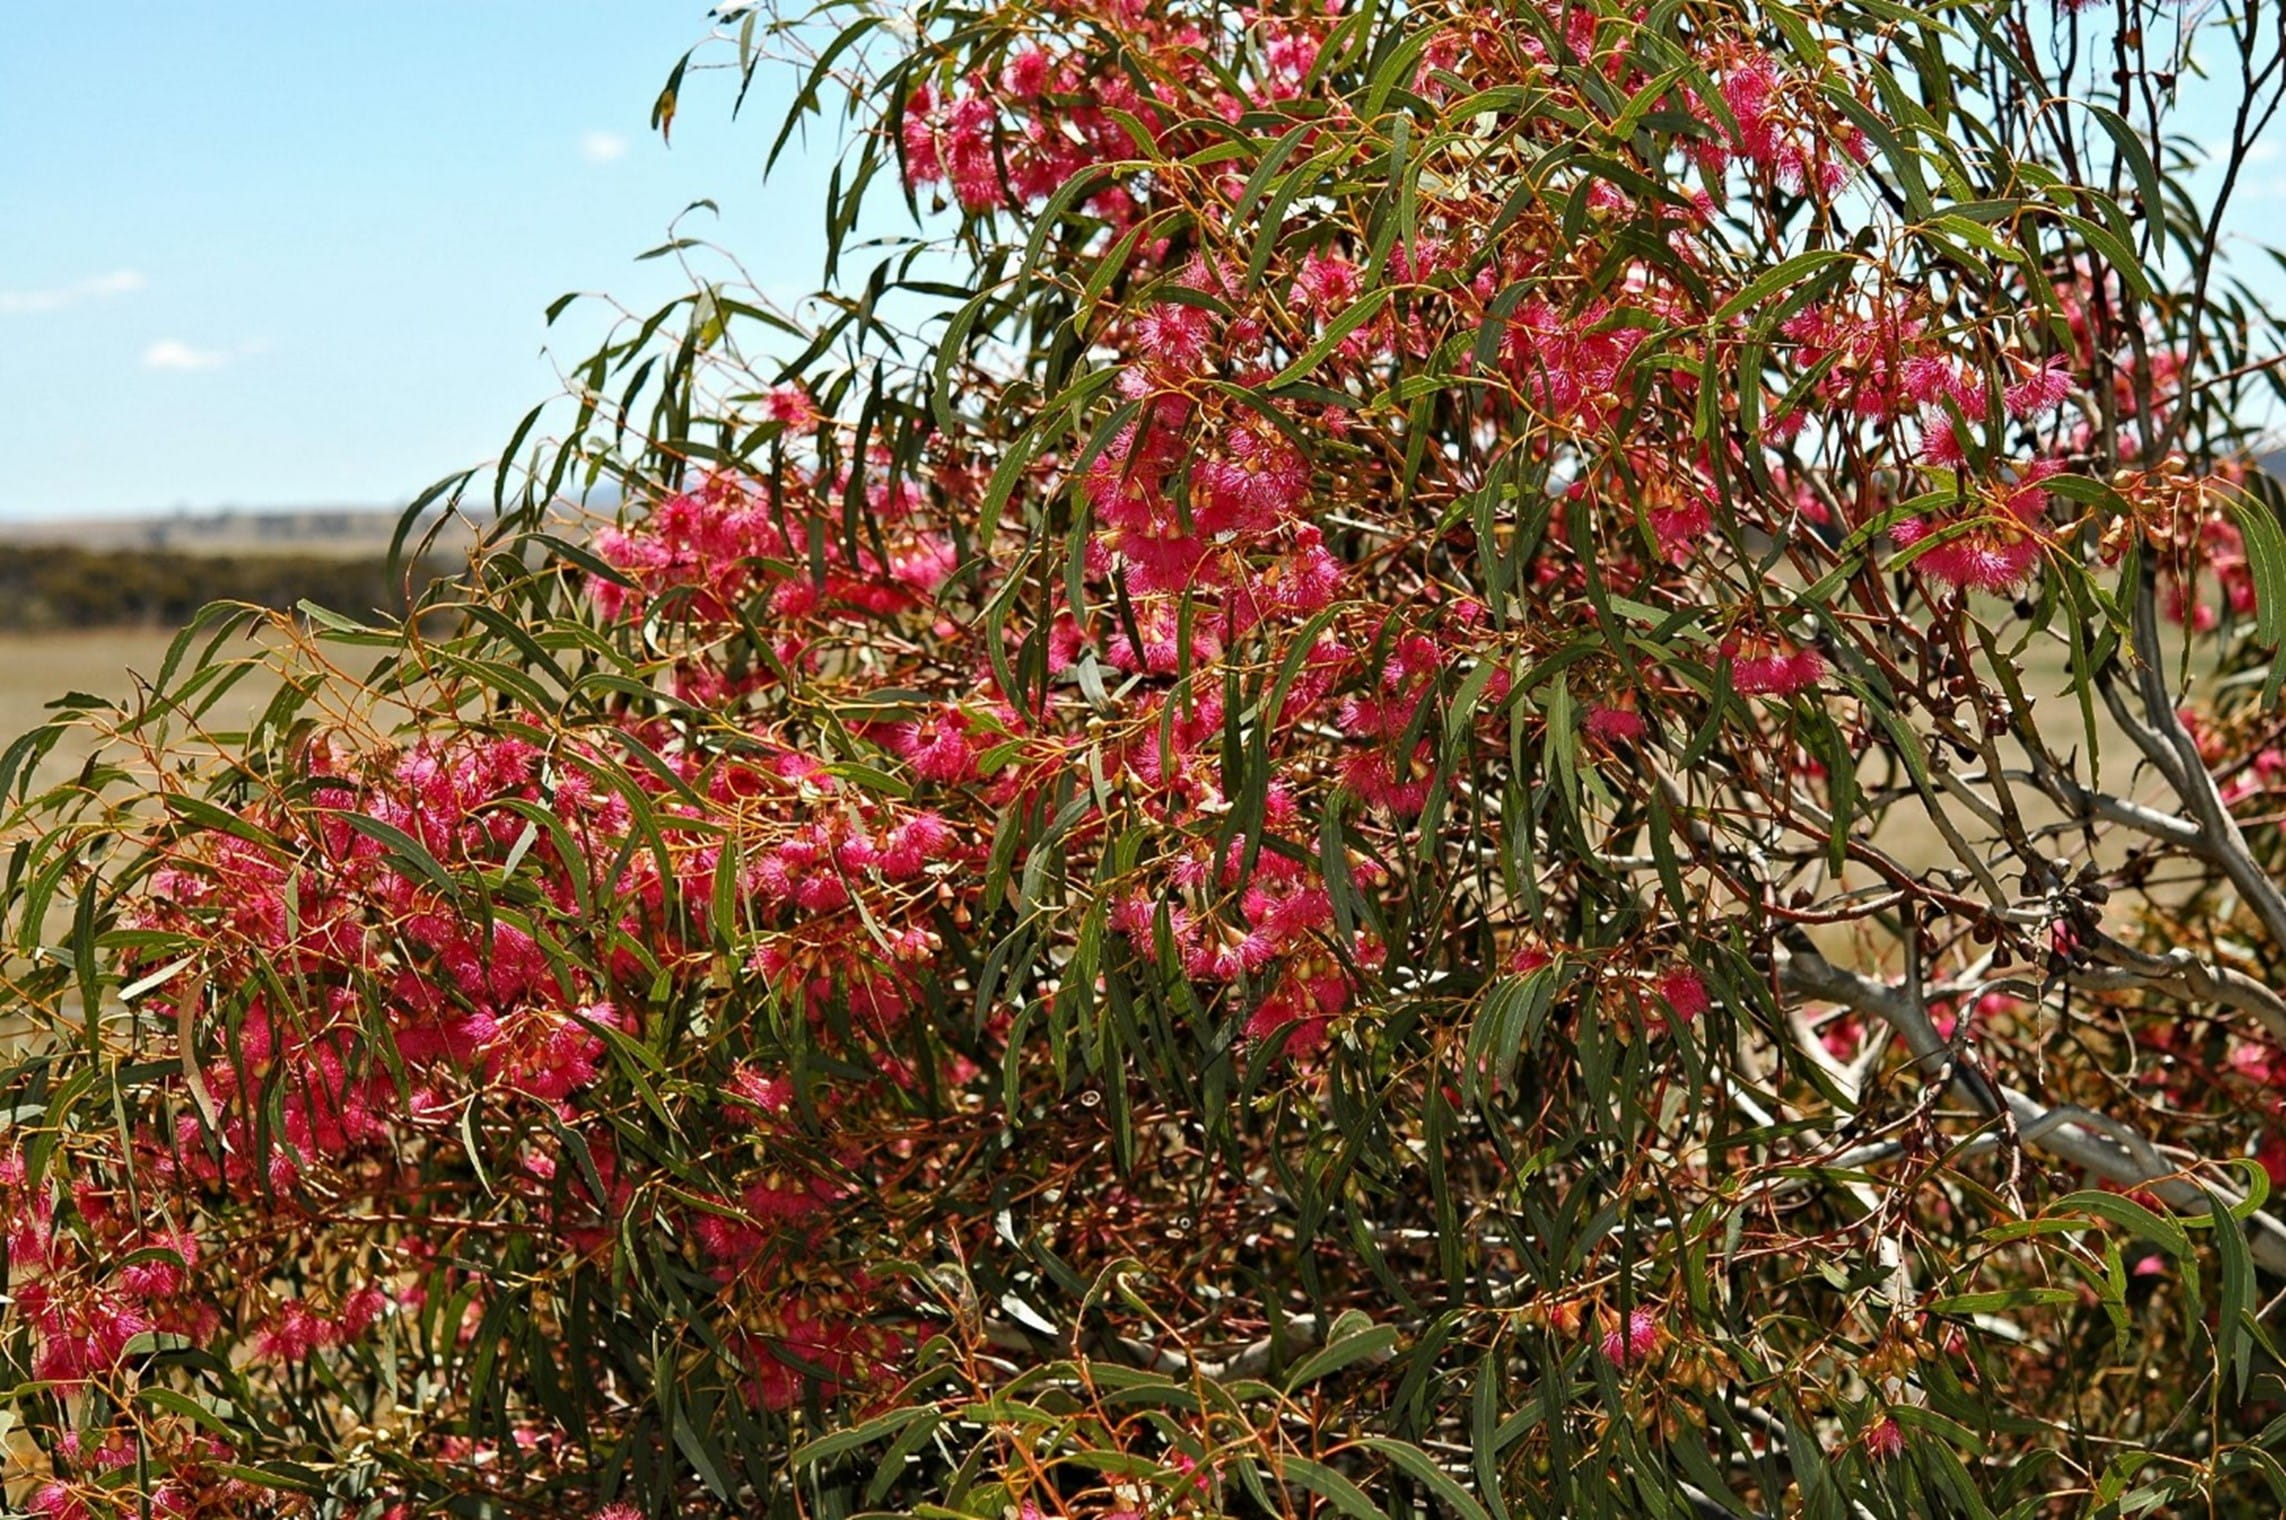 The flowers are a bright pinkish-red colour, against  a background of dark green leaves. 